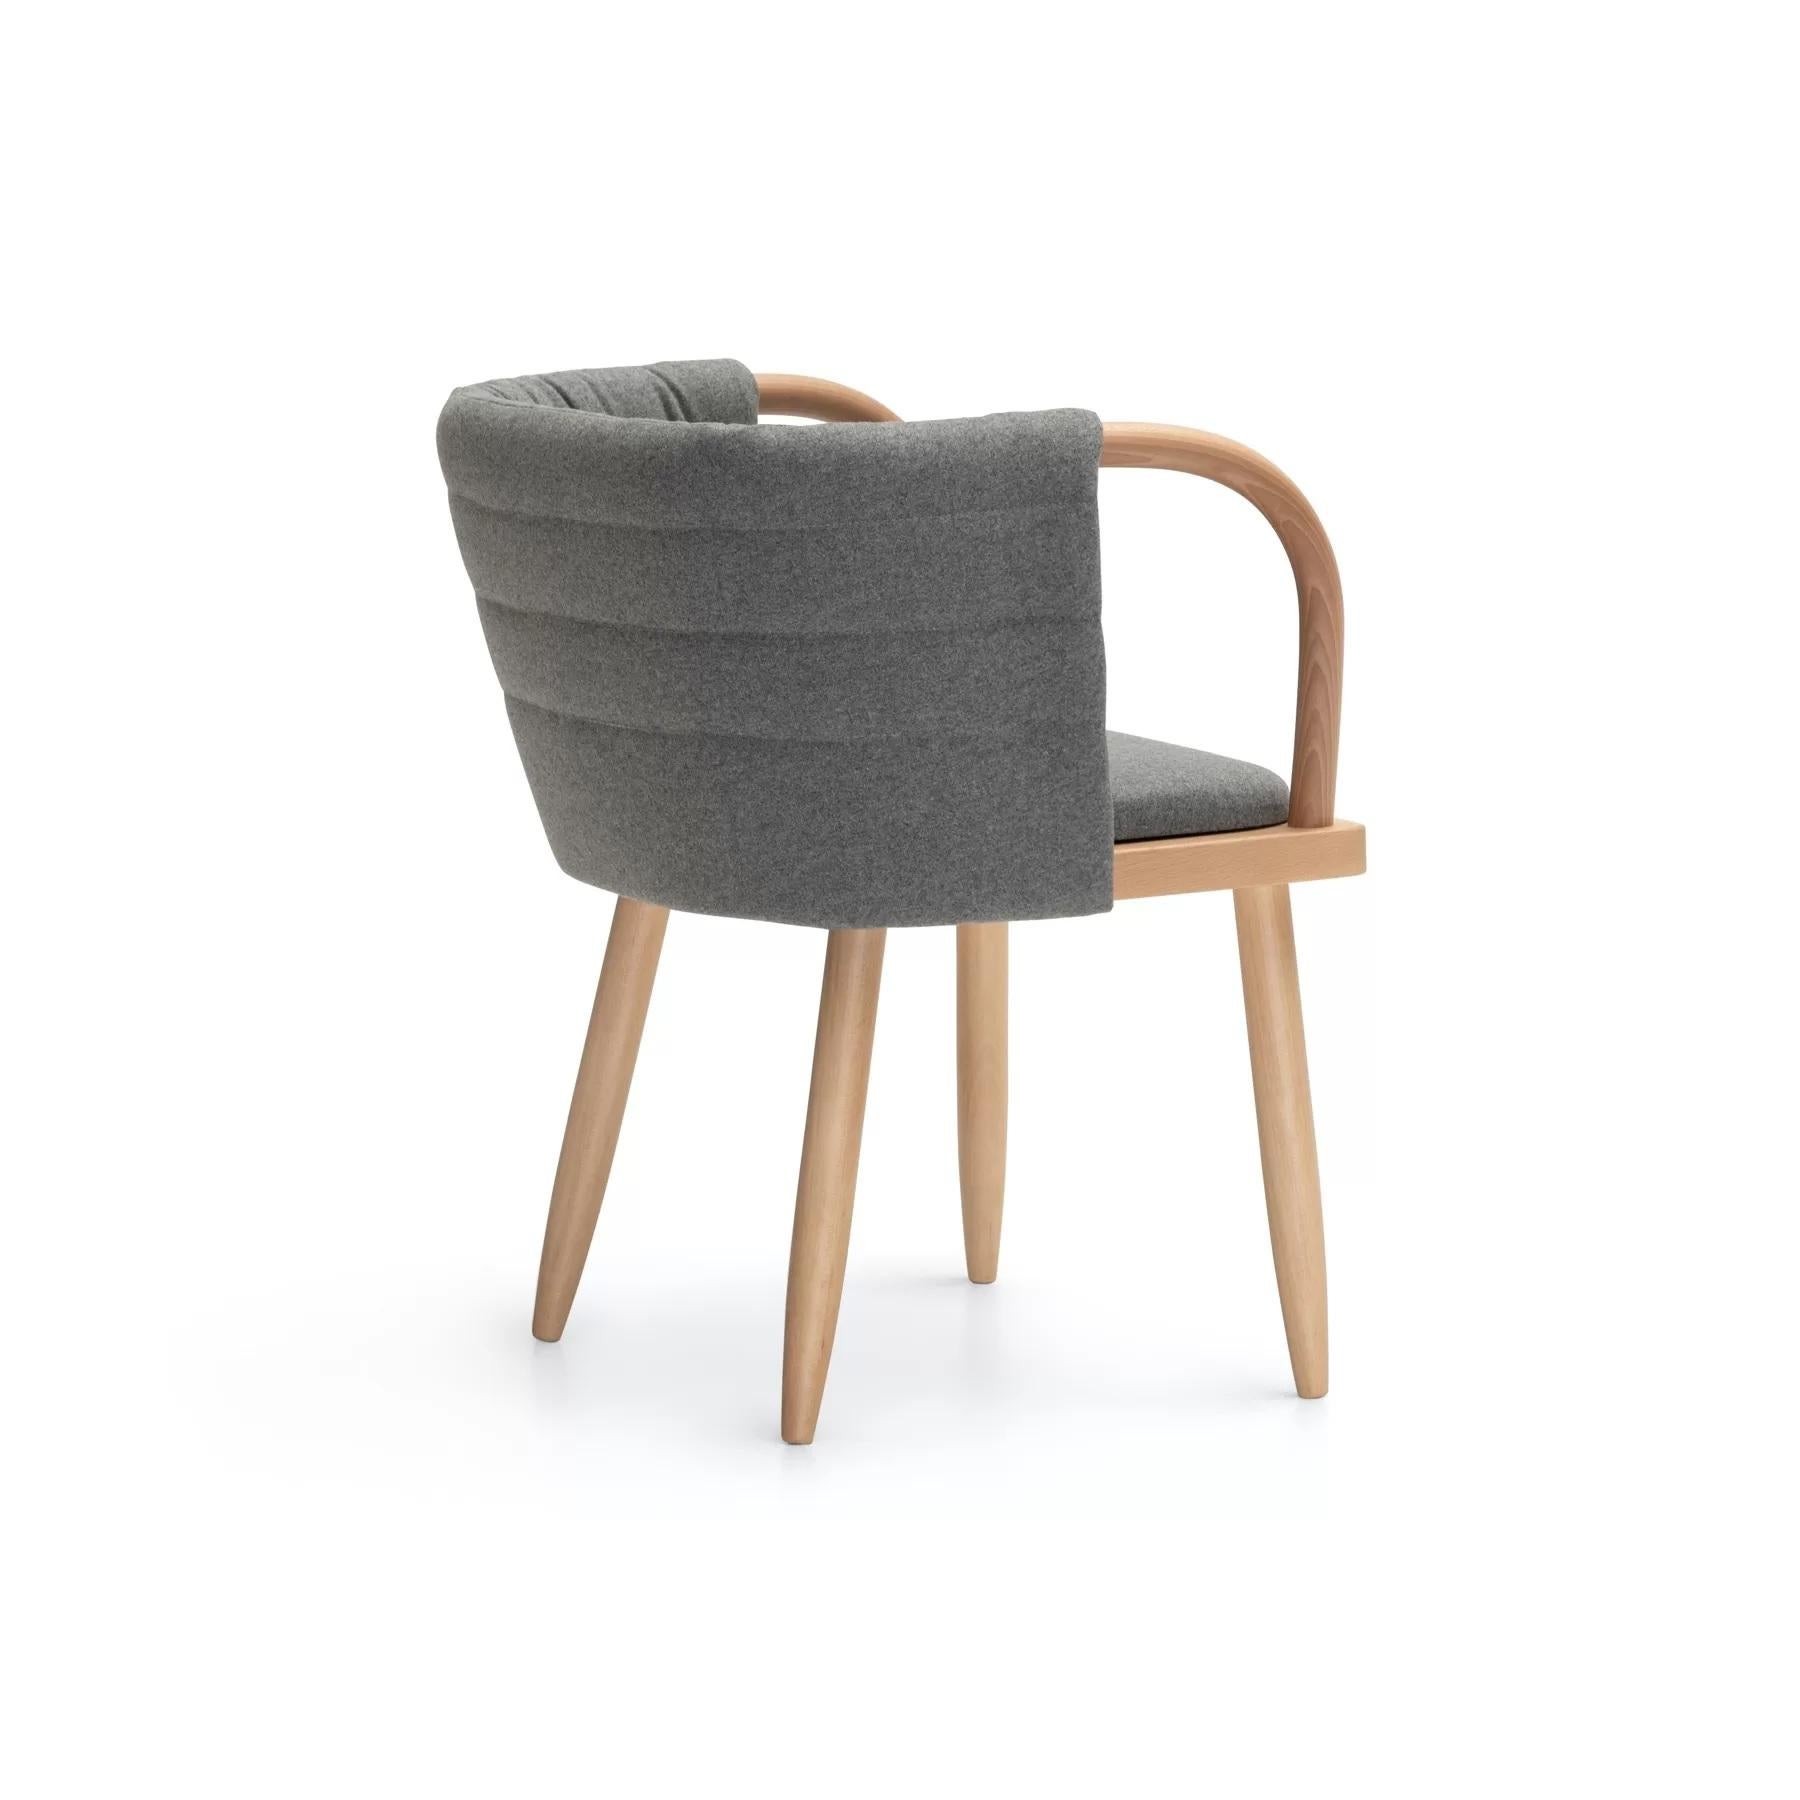 curved wooden chair